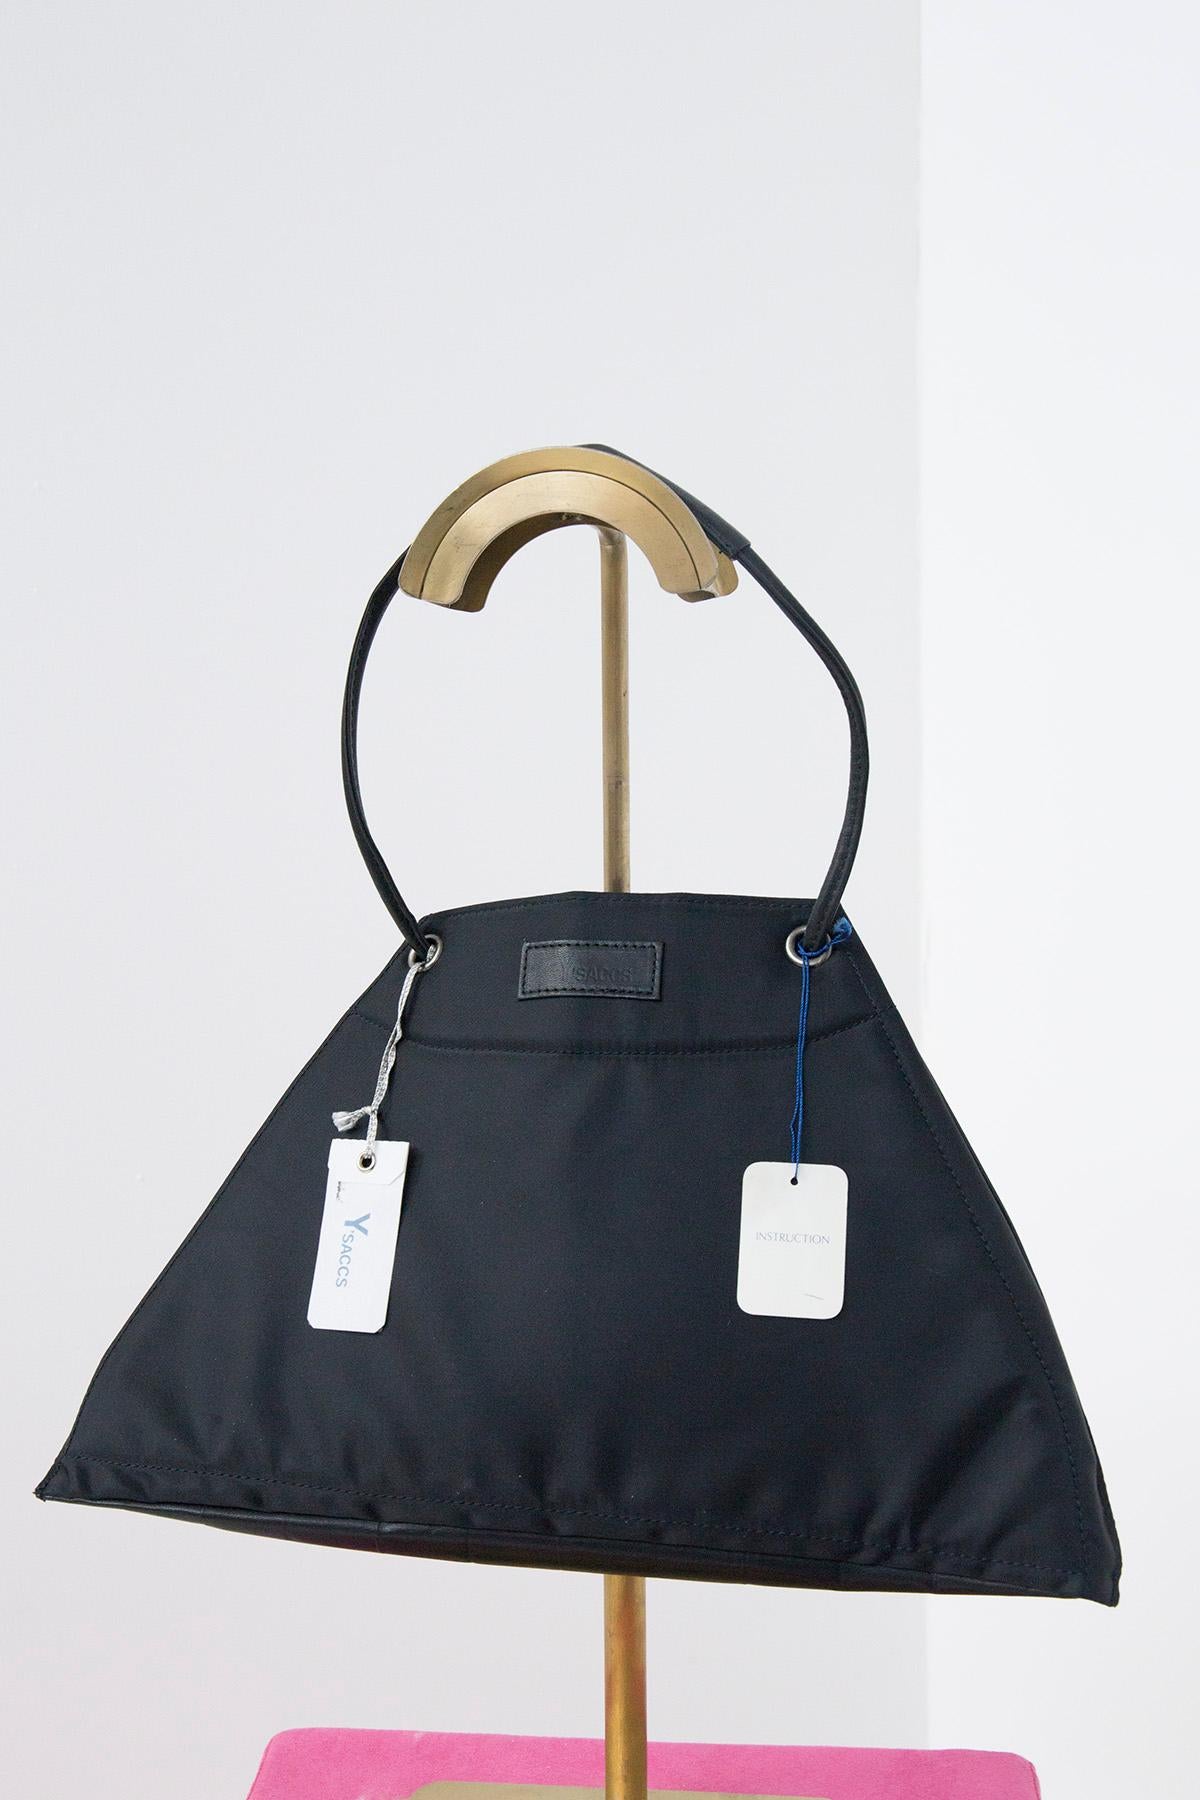 MIYAKE ISSEY Pleated Black Leather Bag For Sale 4